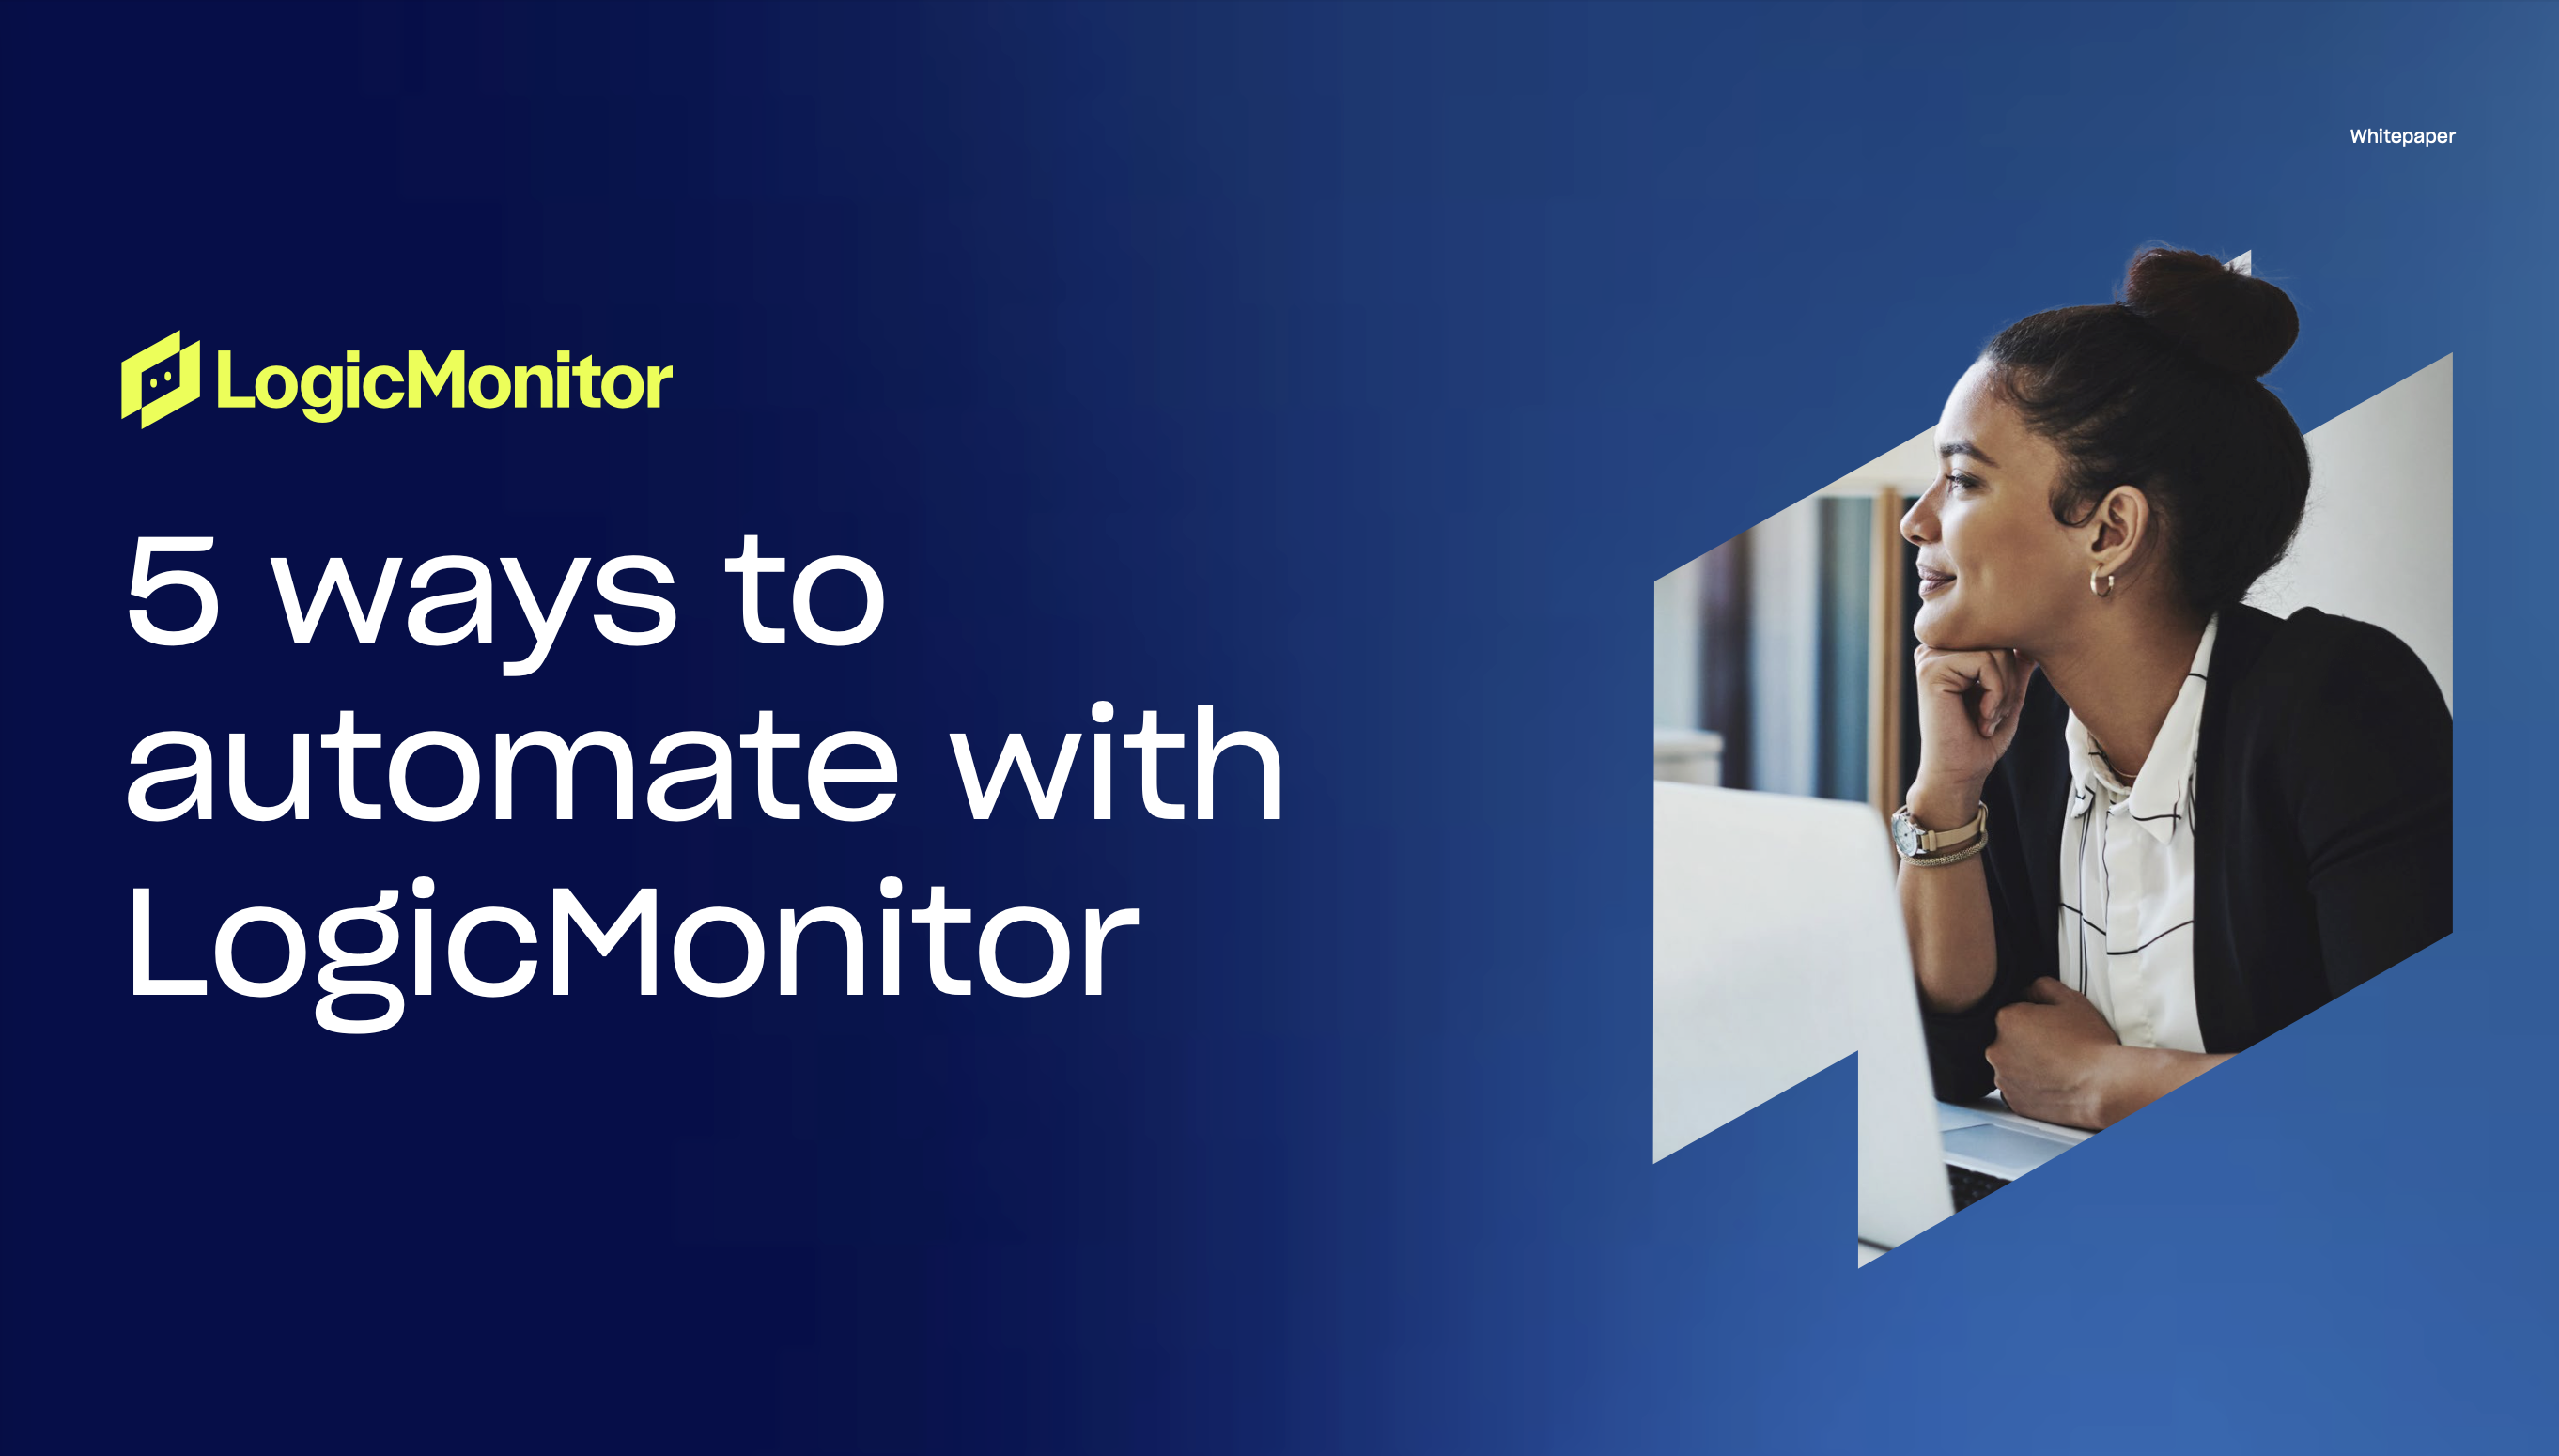 5 ways to automate with LogicMonitor